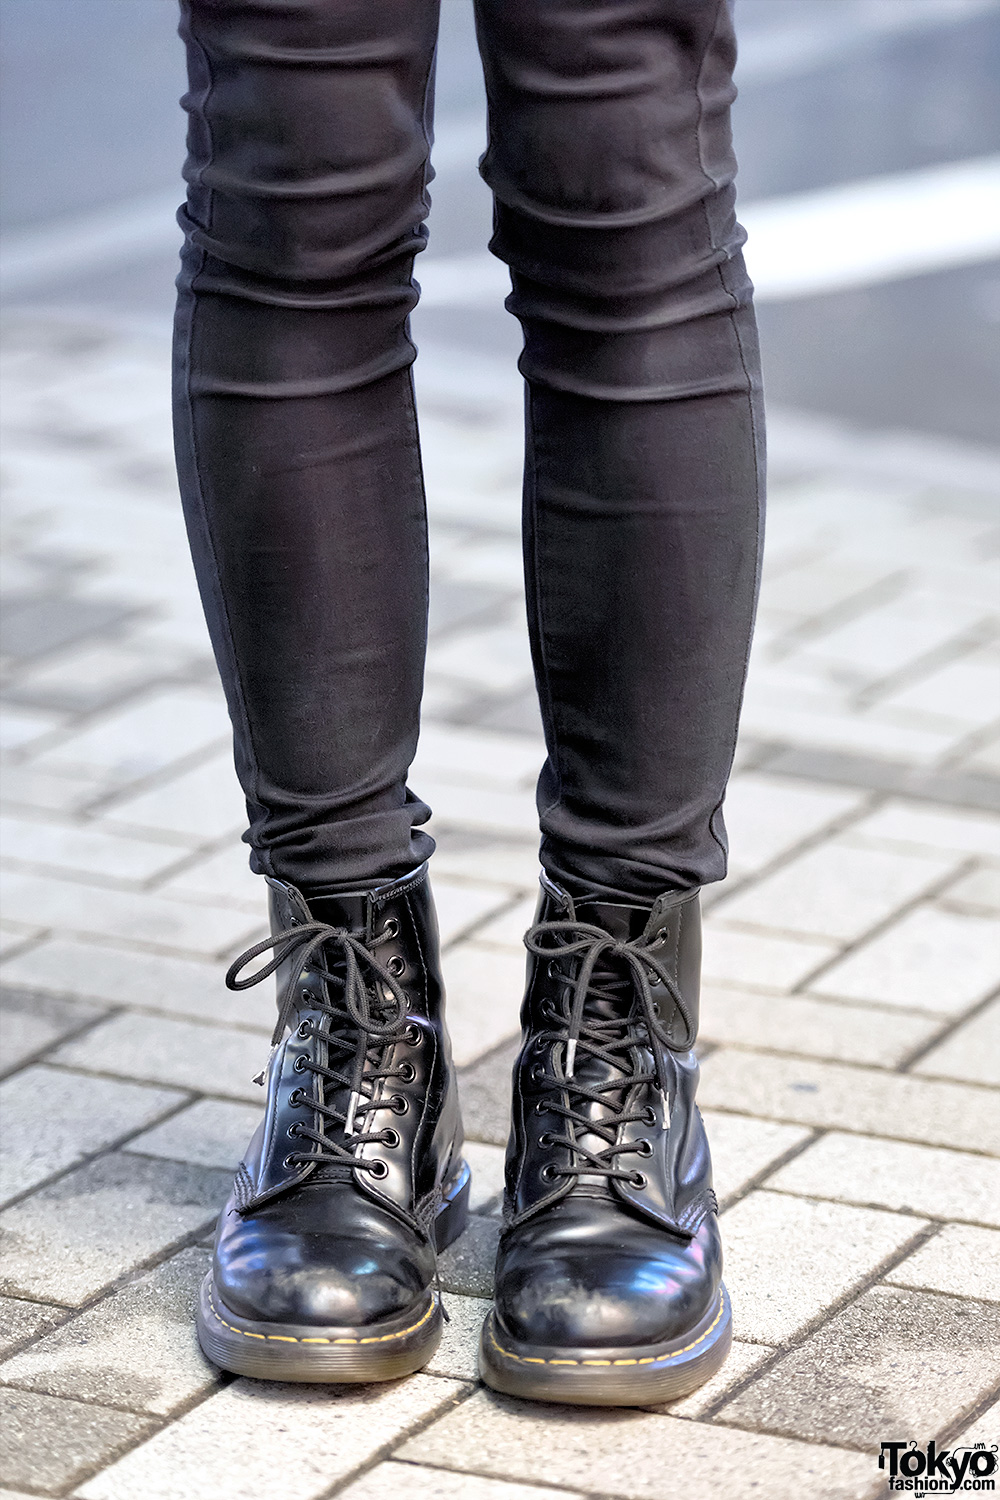 White-dr-martens-boots-blue-uniqlo-jeans-black-from-singapore-bag